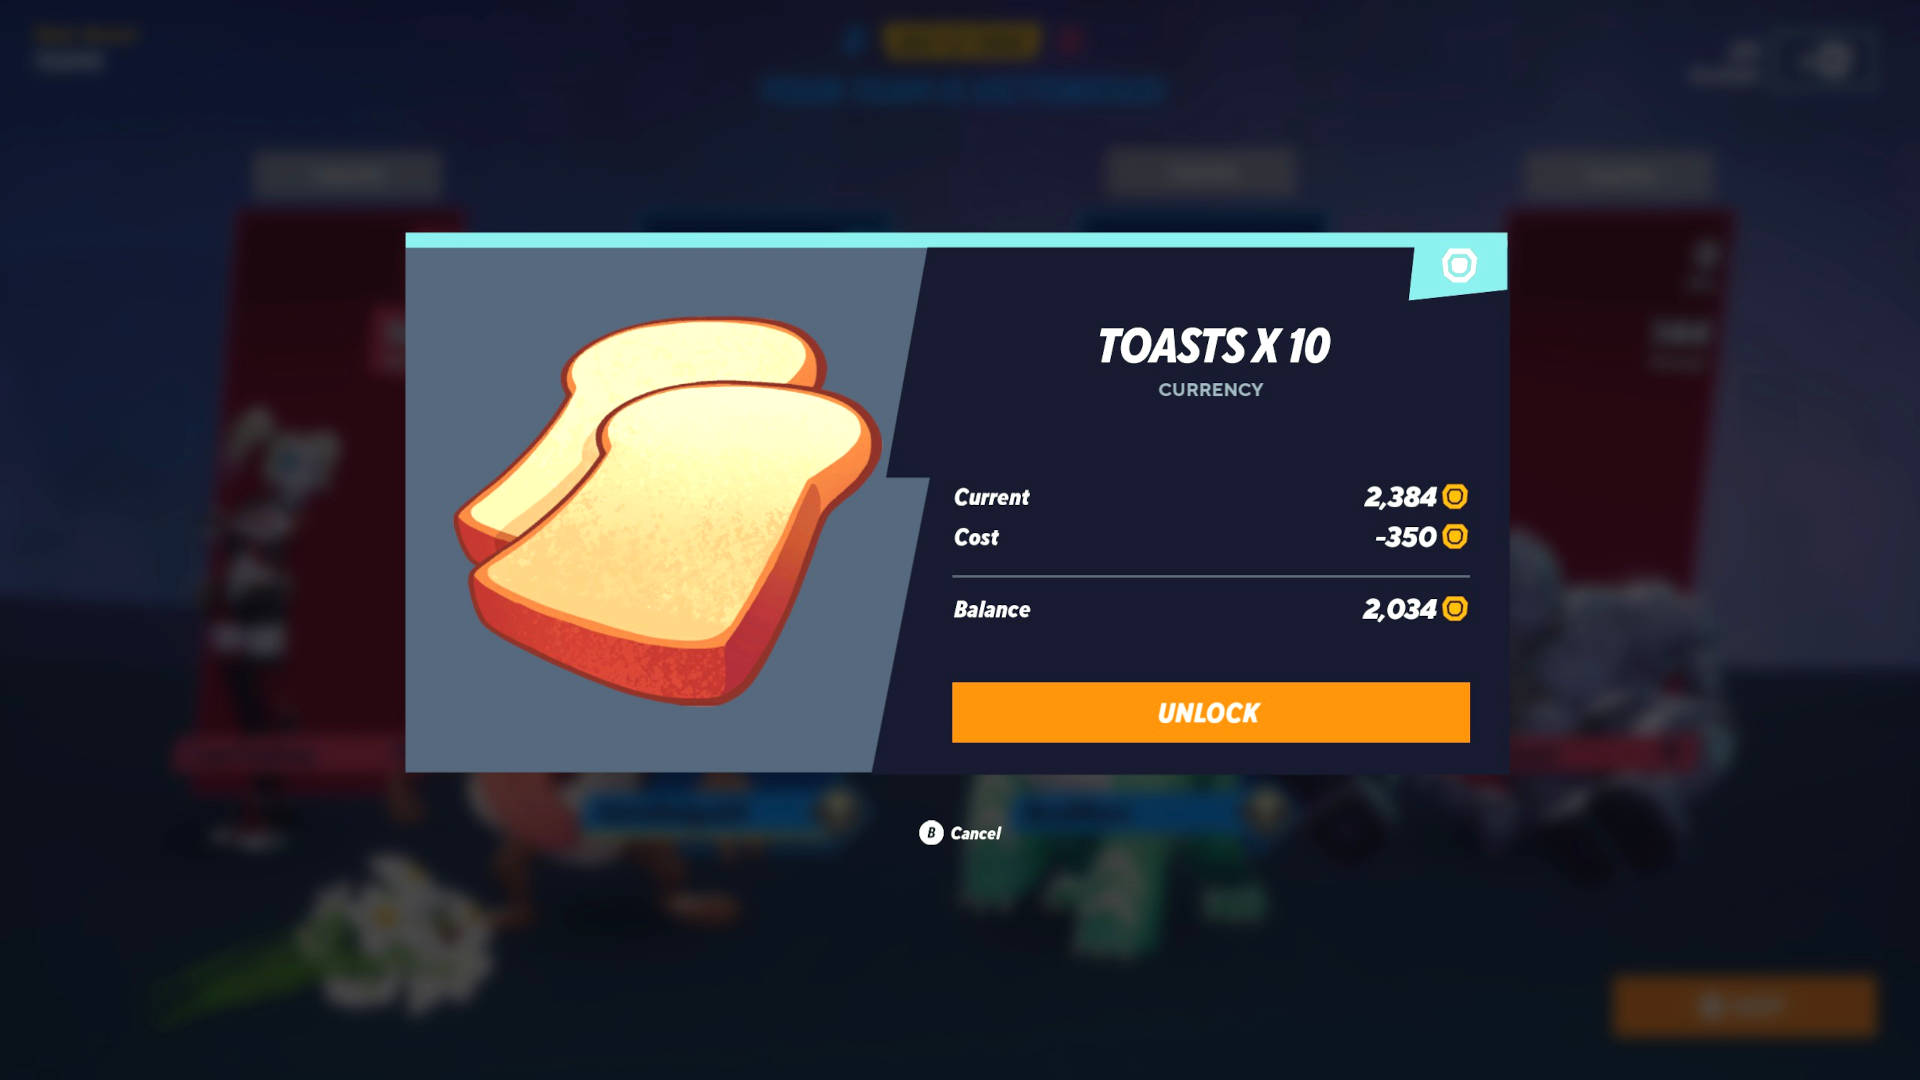 Multiversus toast: the option to buy ten more toasts in exchange for 350 in-game coins.